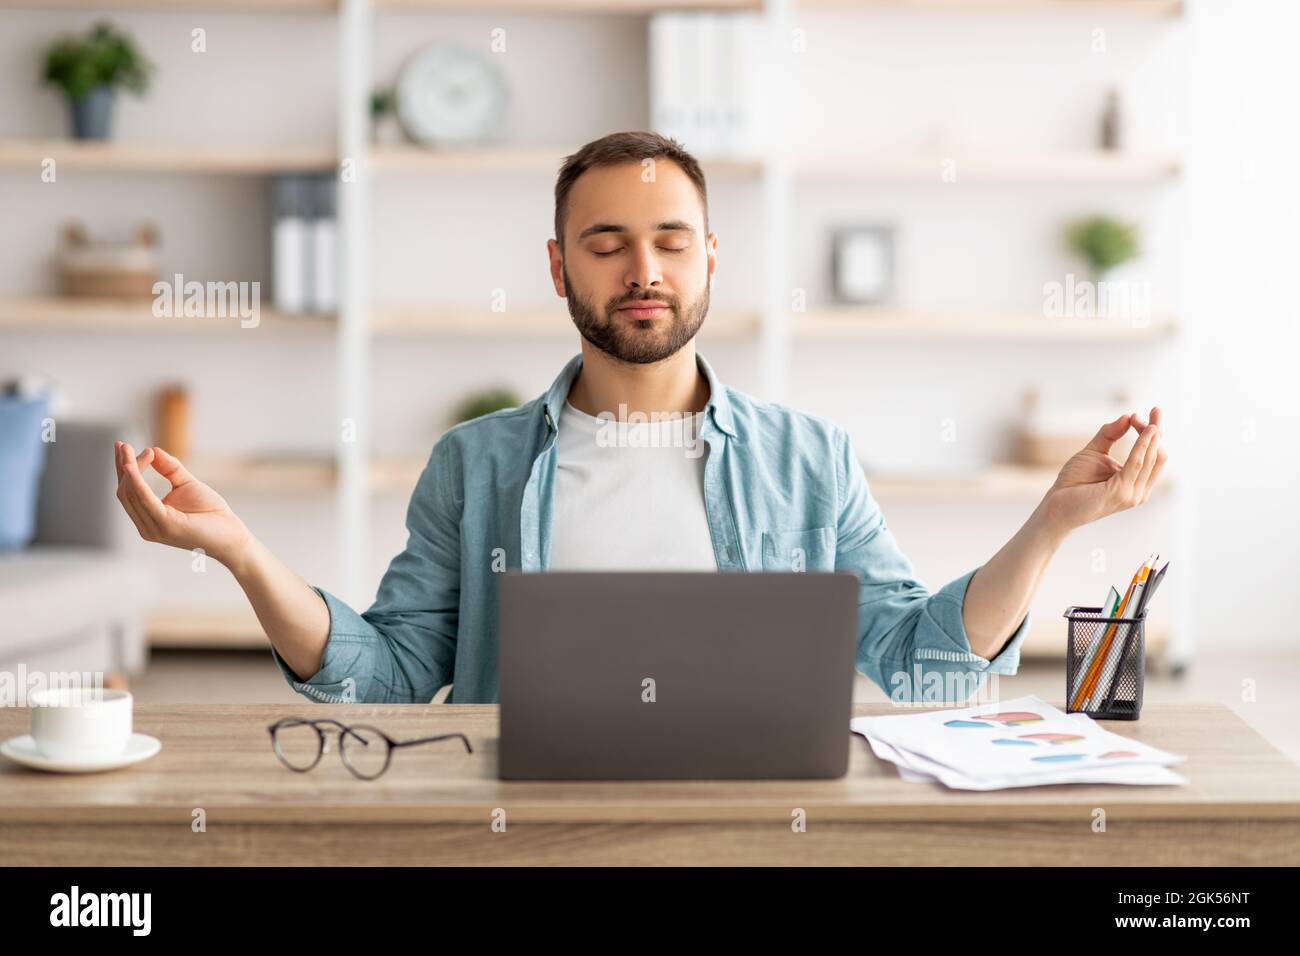 Workplace stress management. Calm Caucasian man meditating with closed eyes in front of laptop pc at home office Stock Photo